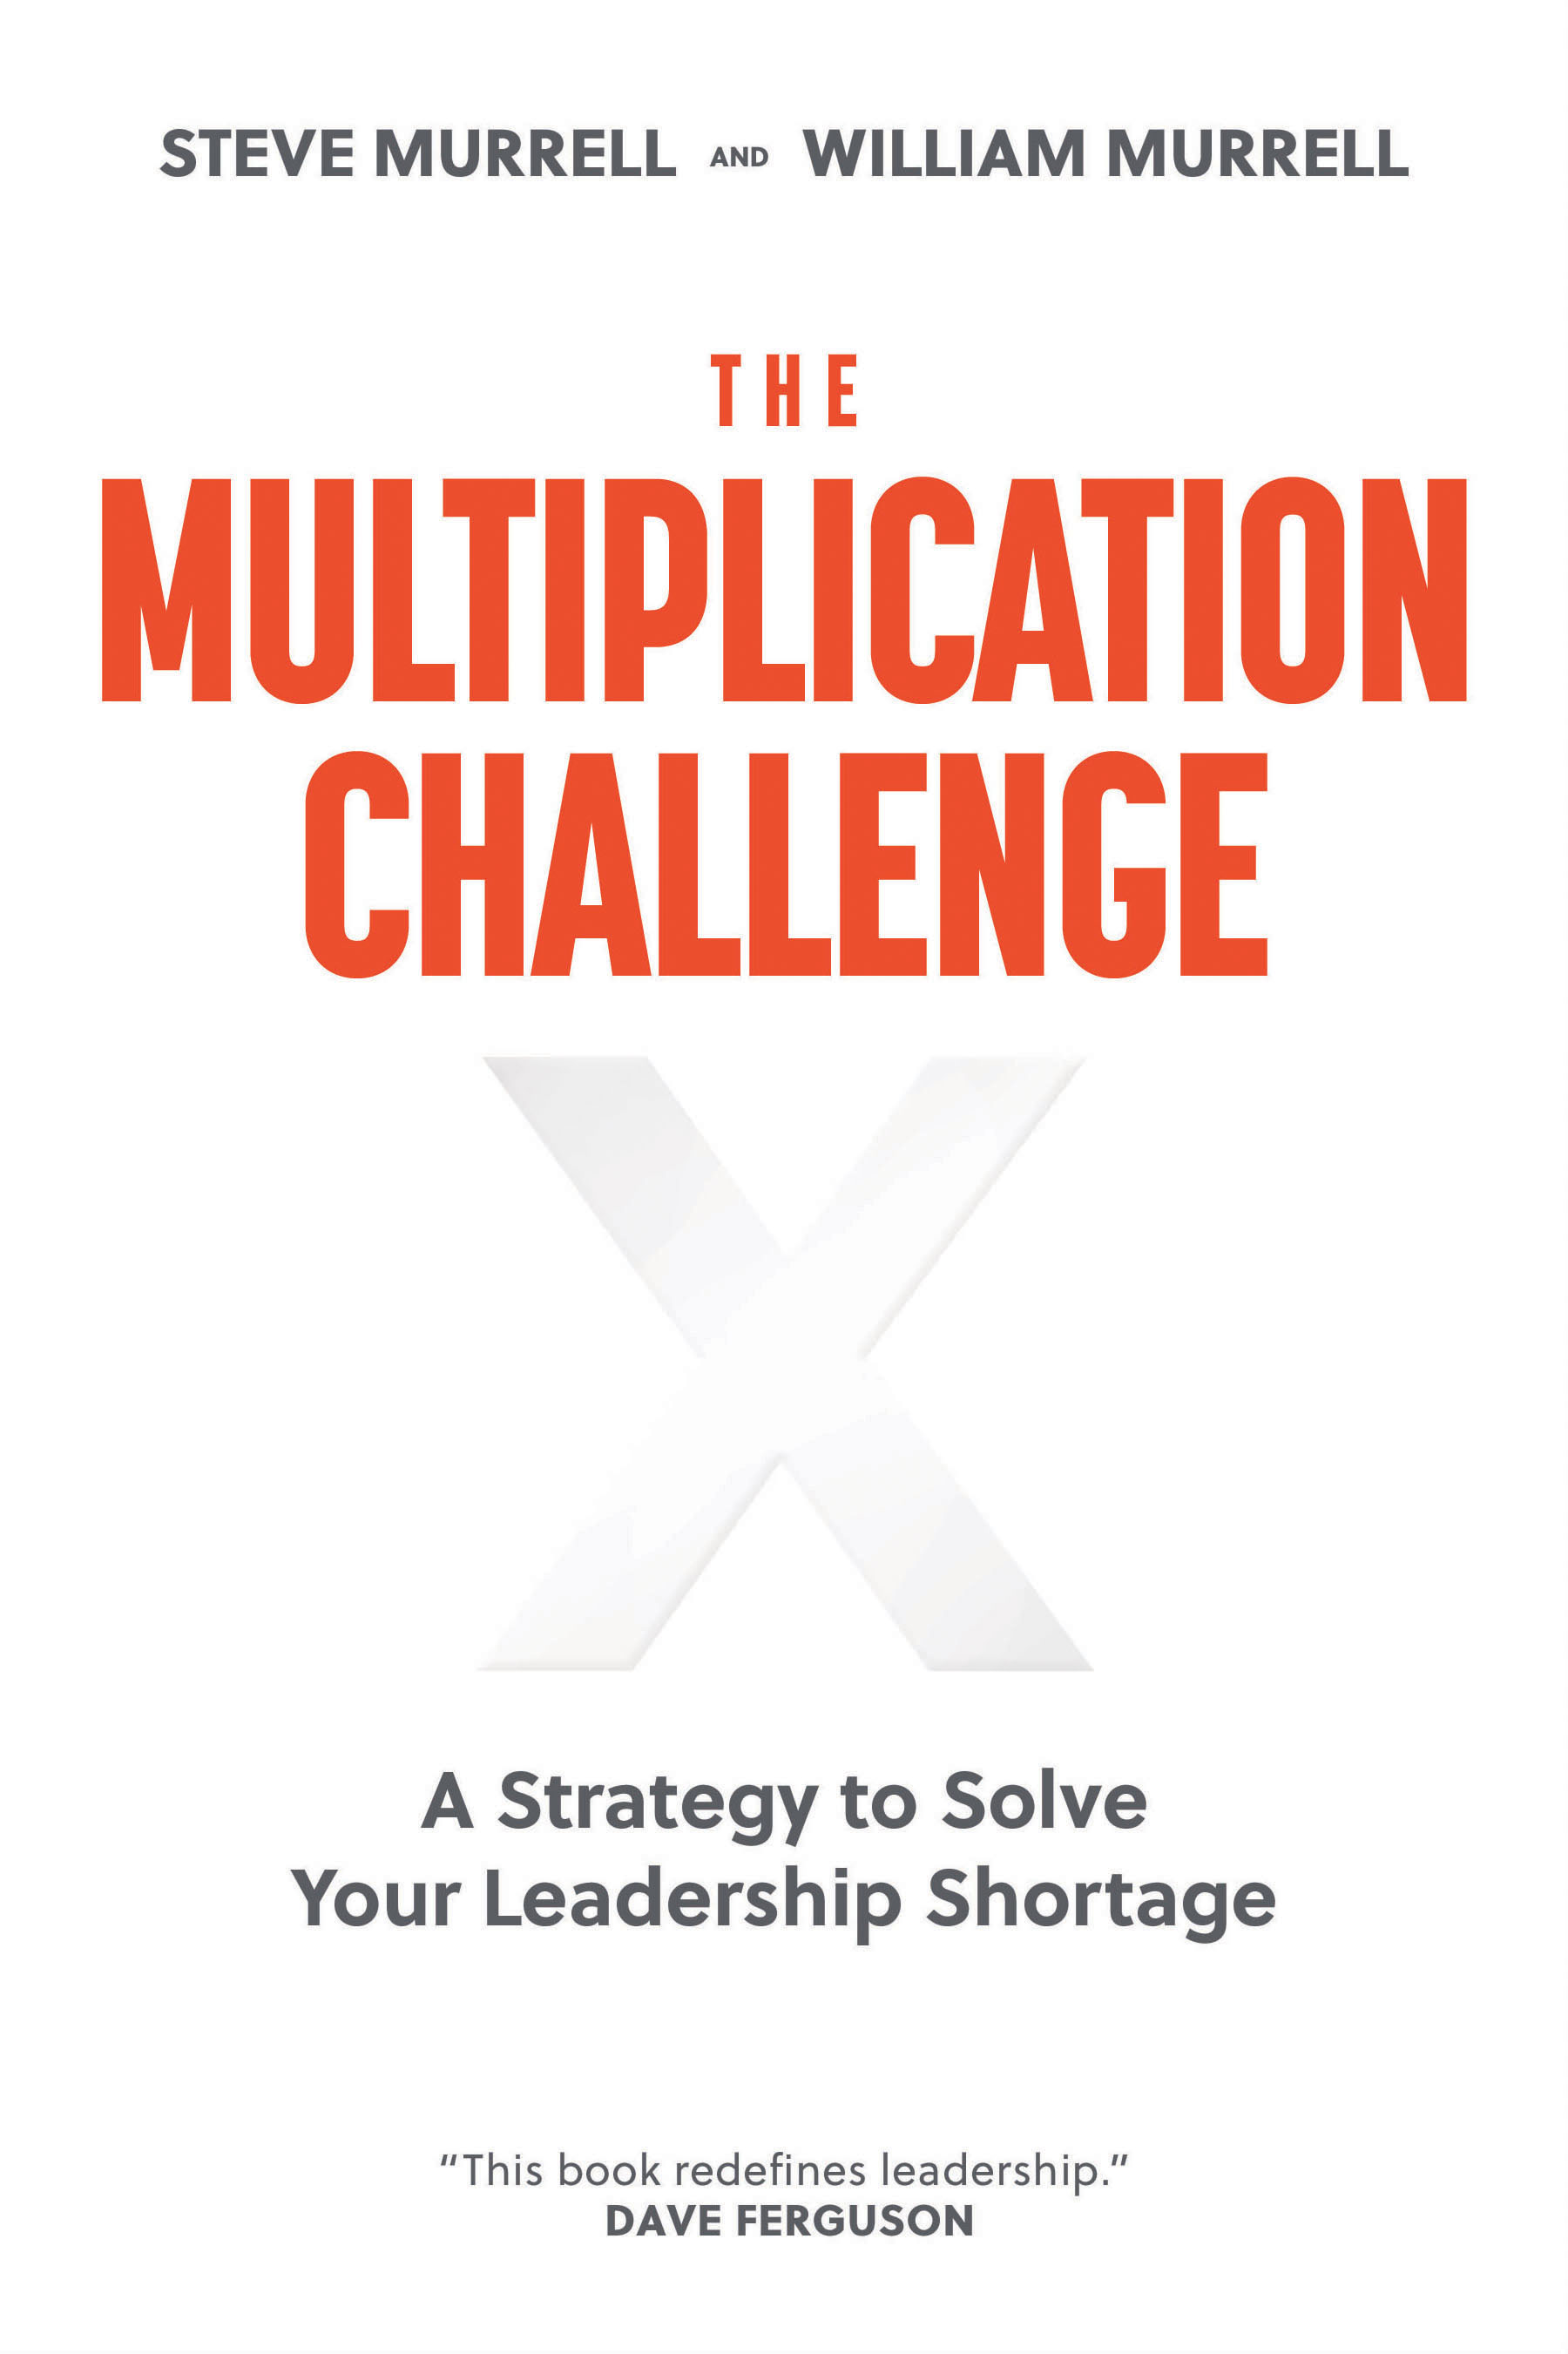 The Multiplication Challenge: A Strategy to Solve Your Leadership Shortage-image